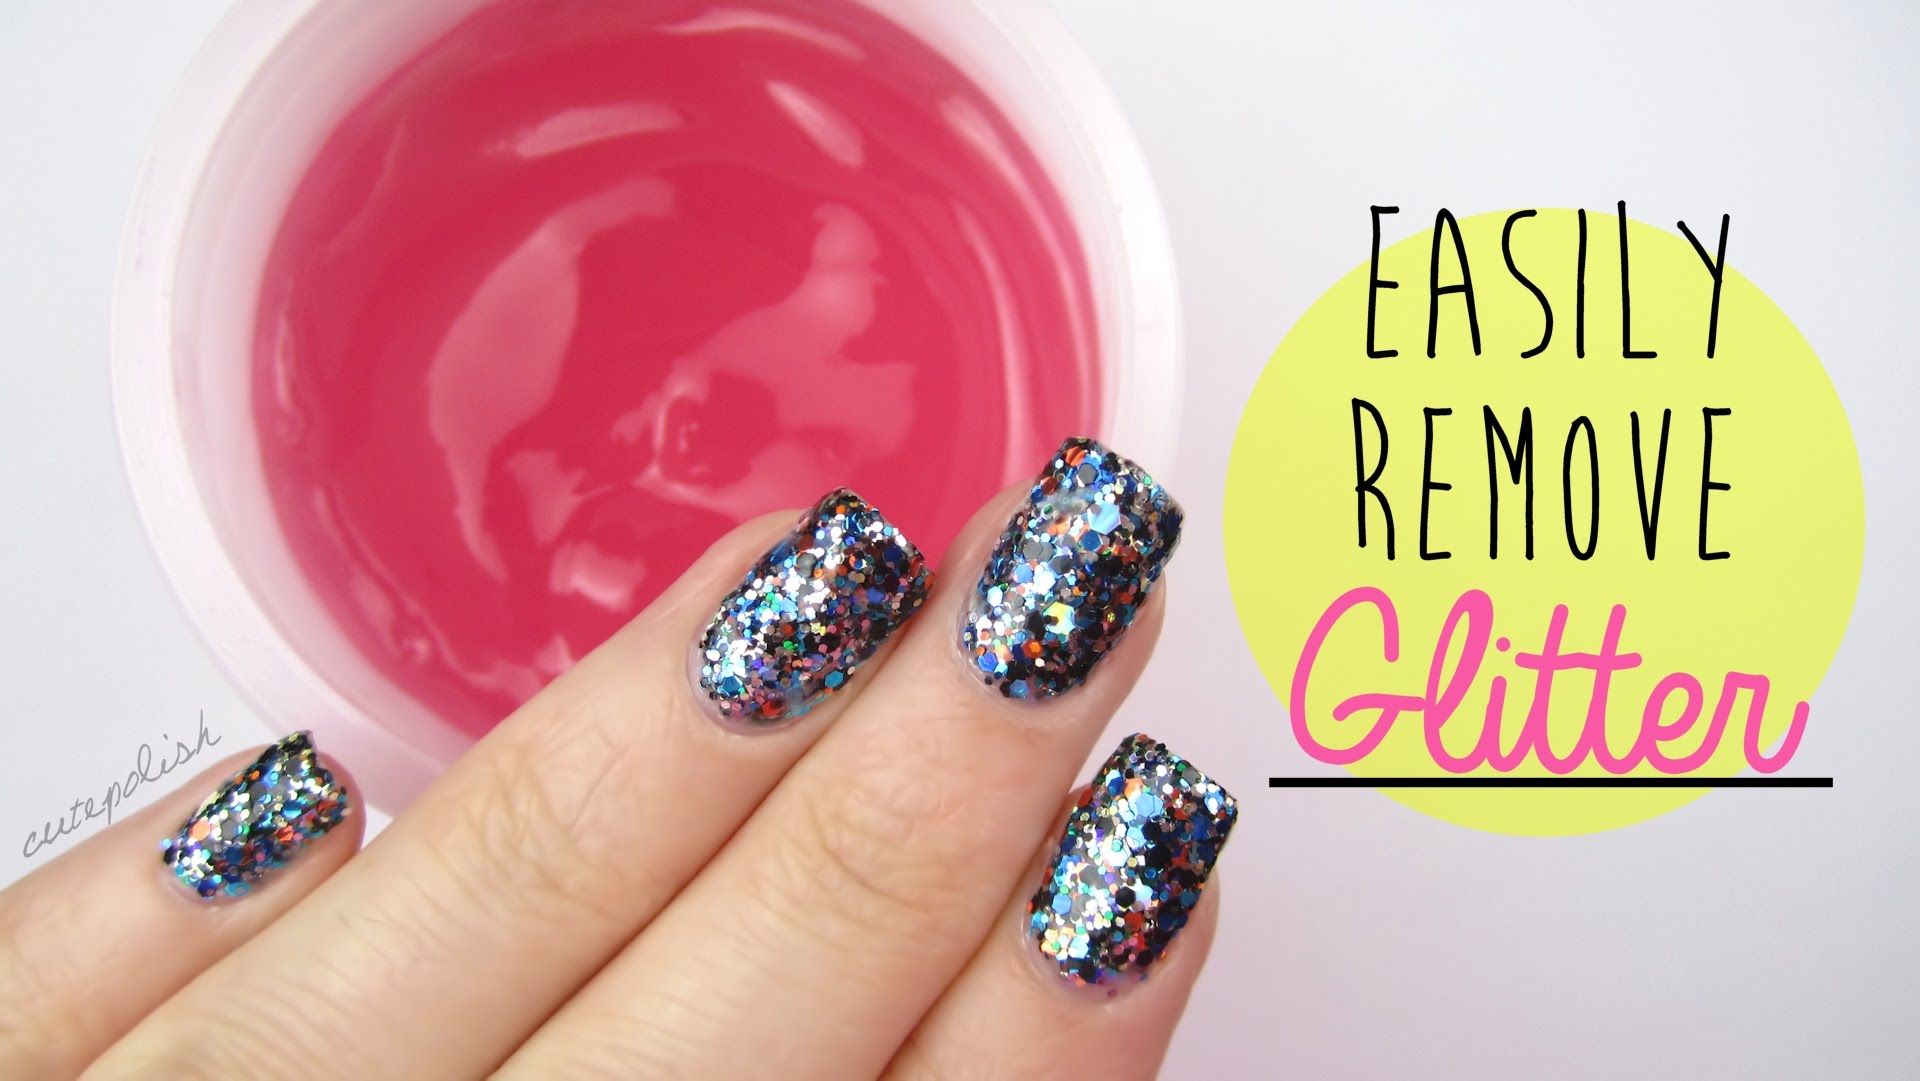 NEW & EASIER Way to Remove Glitter Nail Polish?! - YouTube